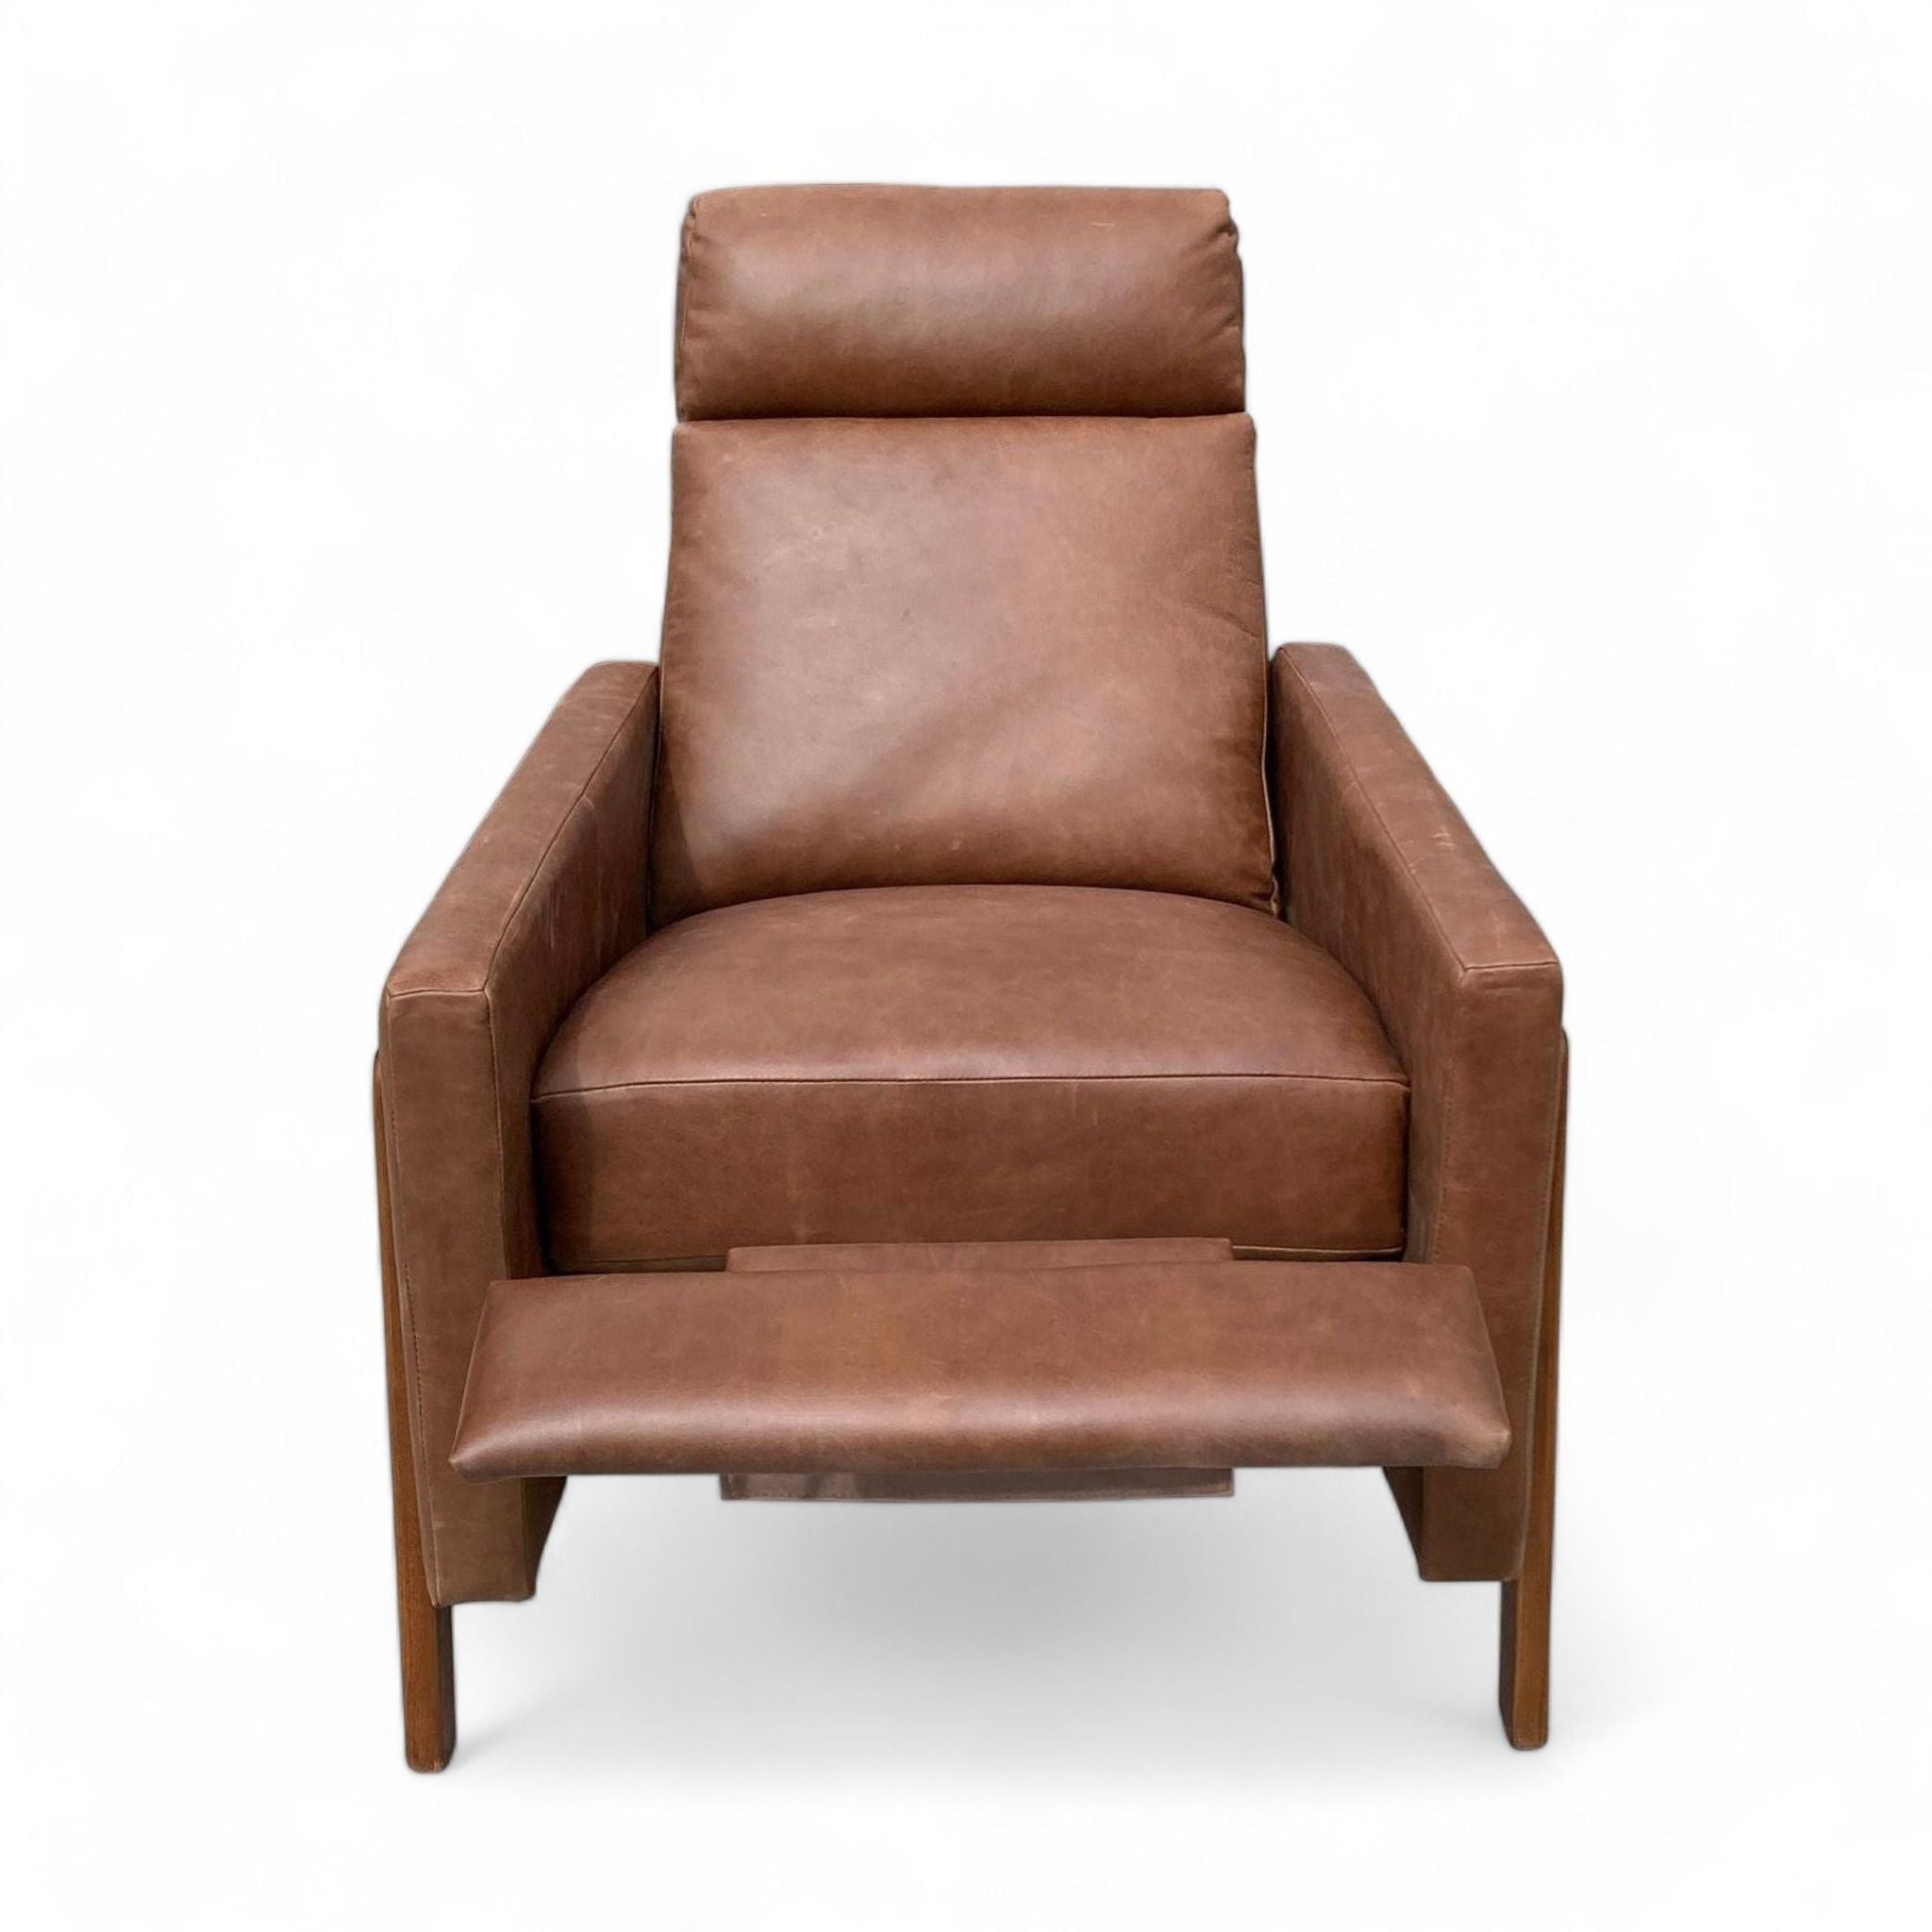 Brown leather Spencer Recliner by West Elm, showcasing a wood frame and push-back mechanism against a clean backdrop.